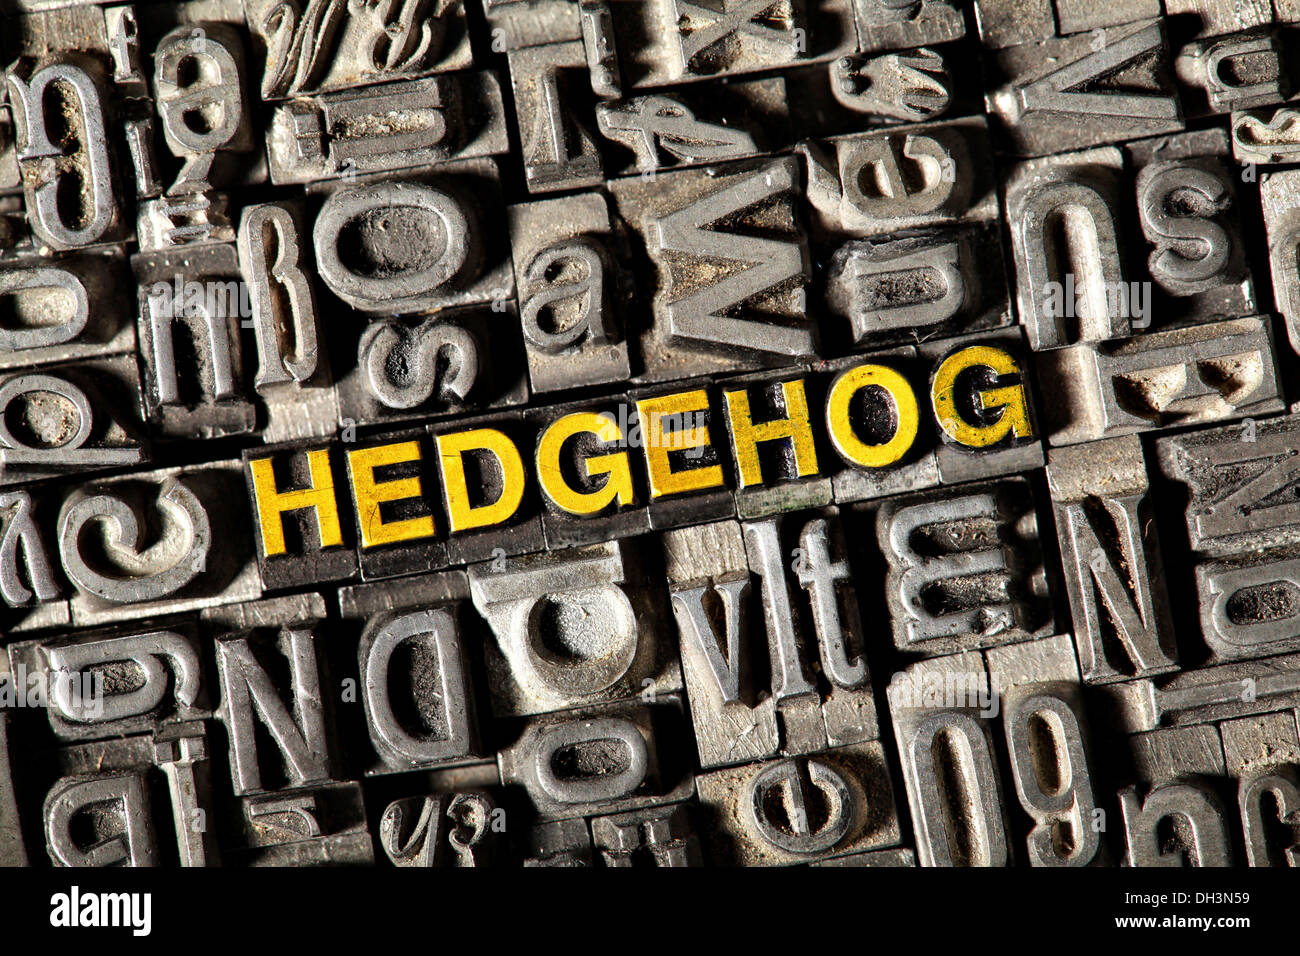 Old lead letters forming the word 'HEDGEHOG' Stock Photo